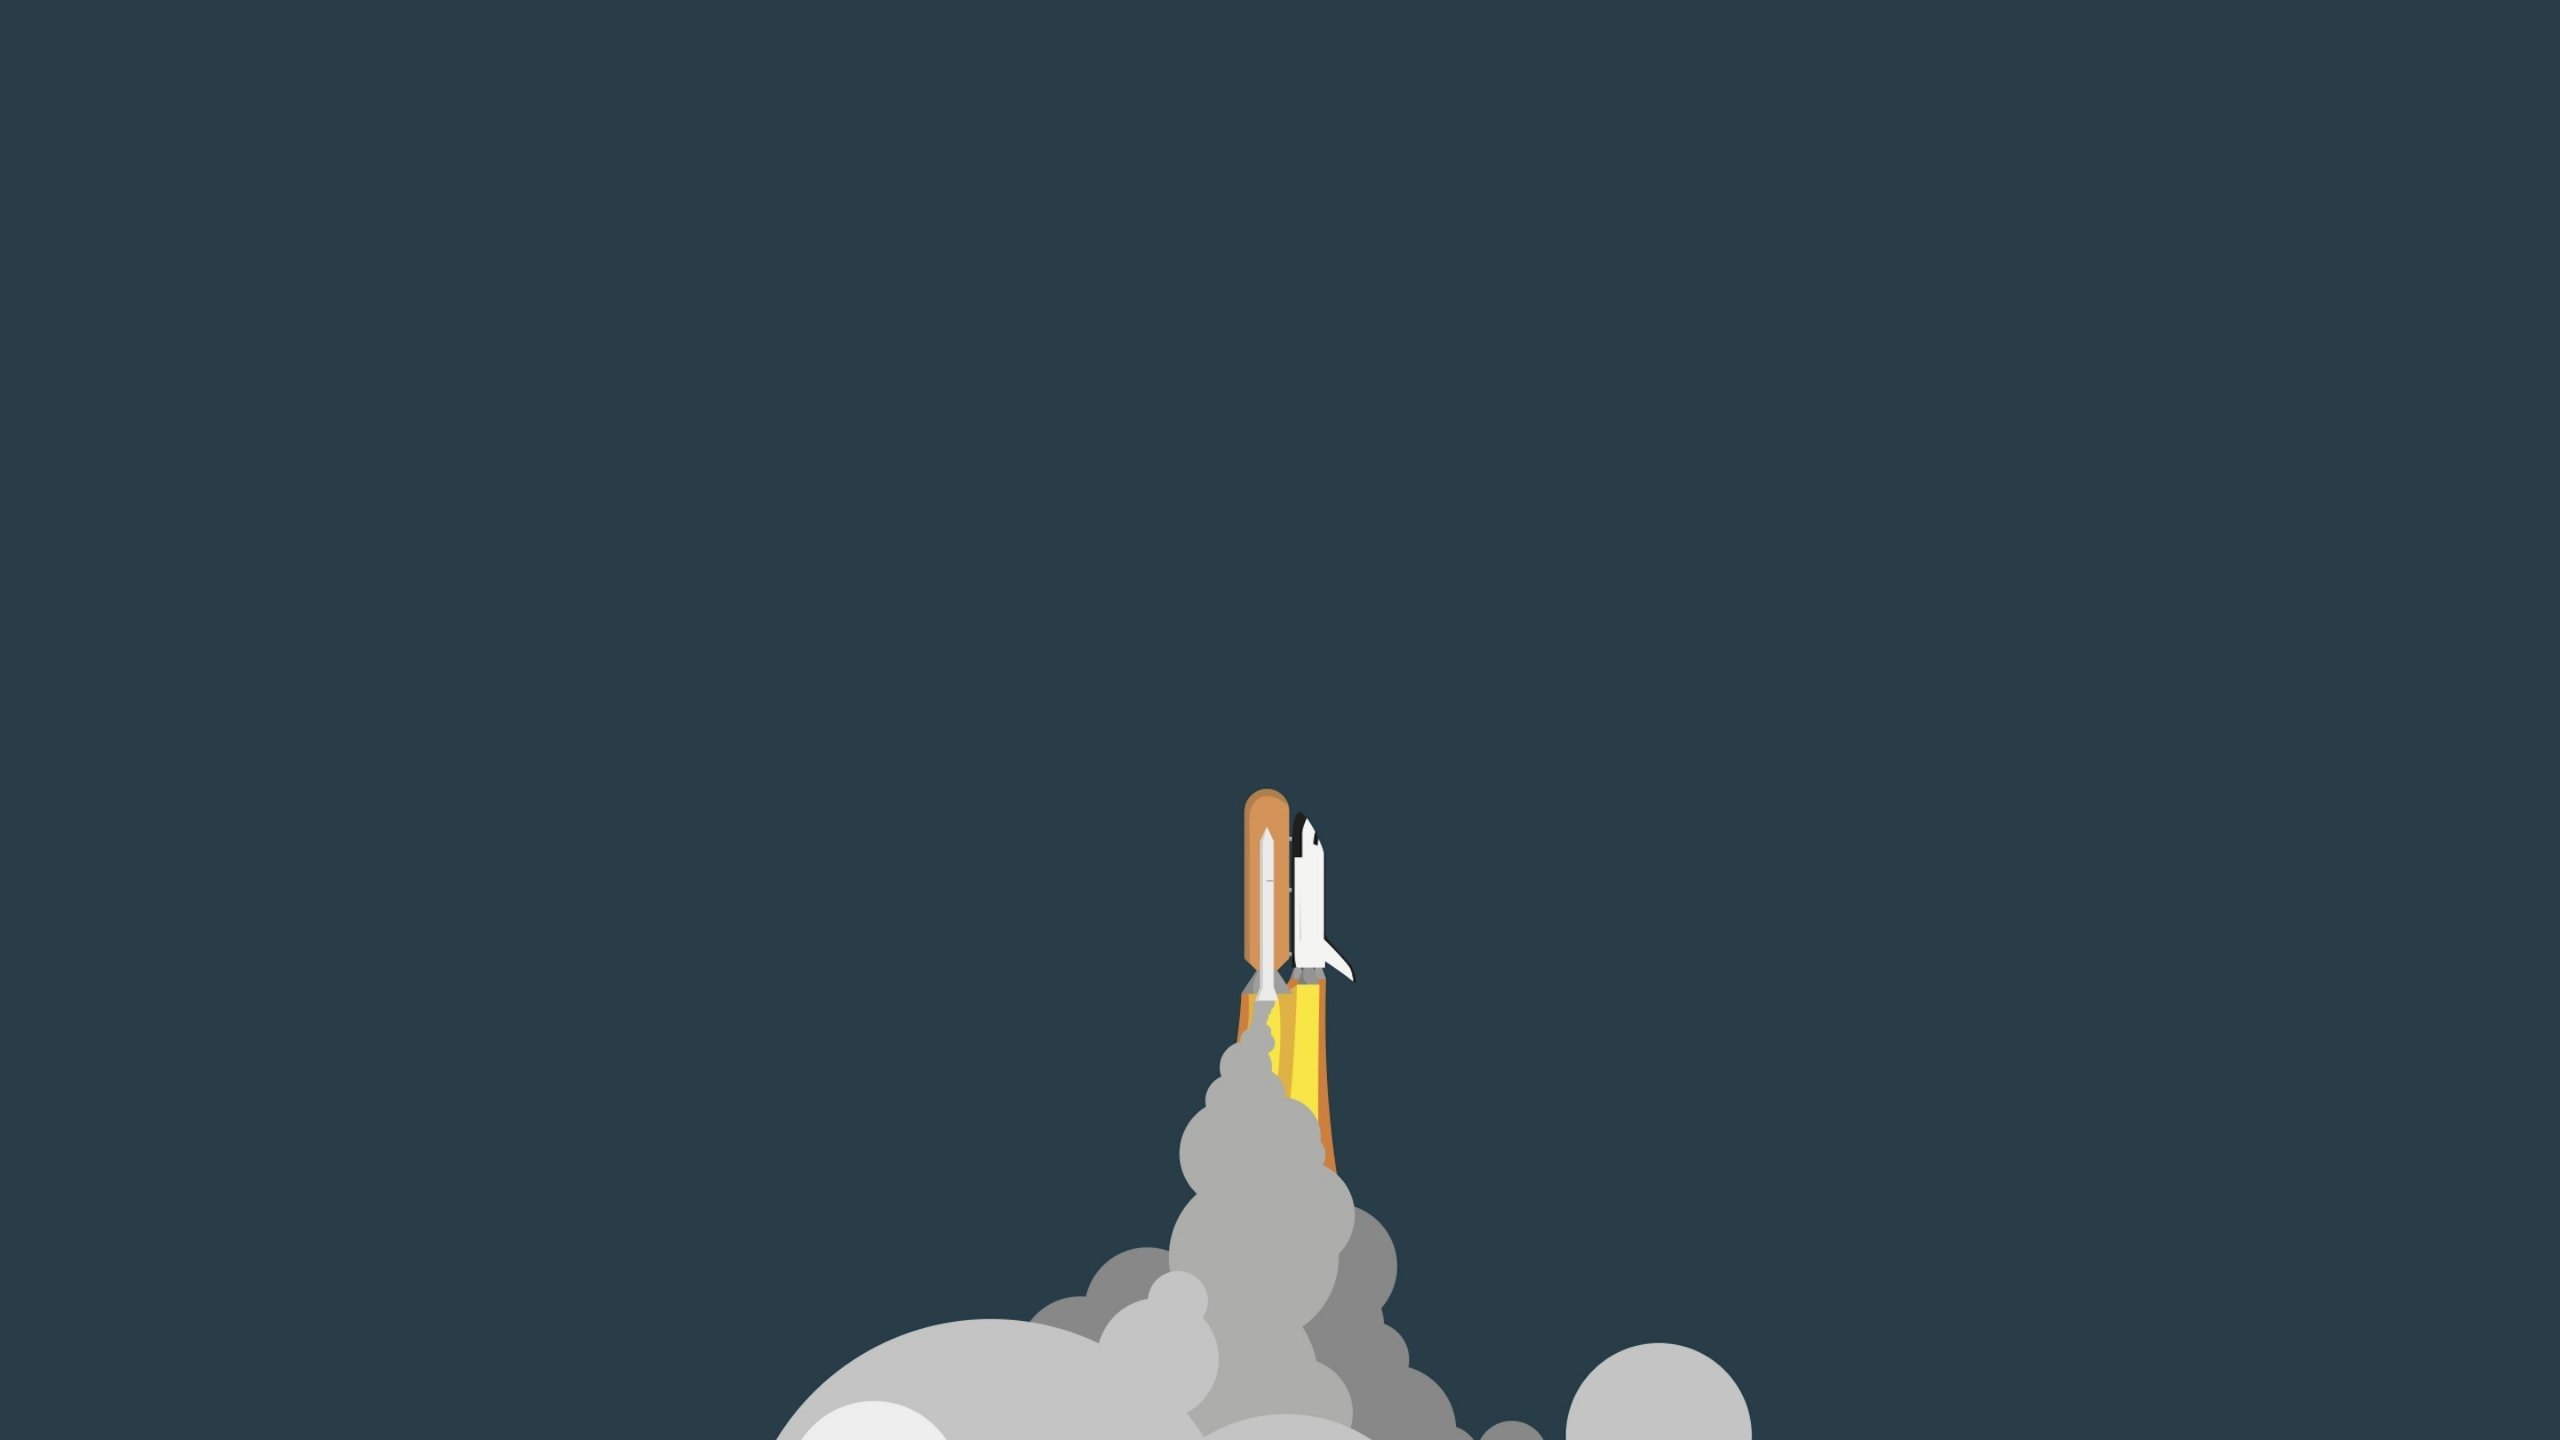 Download 2560x1440 wallpaper minimalist, space, rocket, clouds, dual wide, widescreen 16: widescreen, 2560x1440 HD image, background, 5886